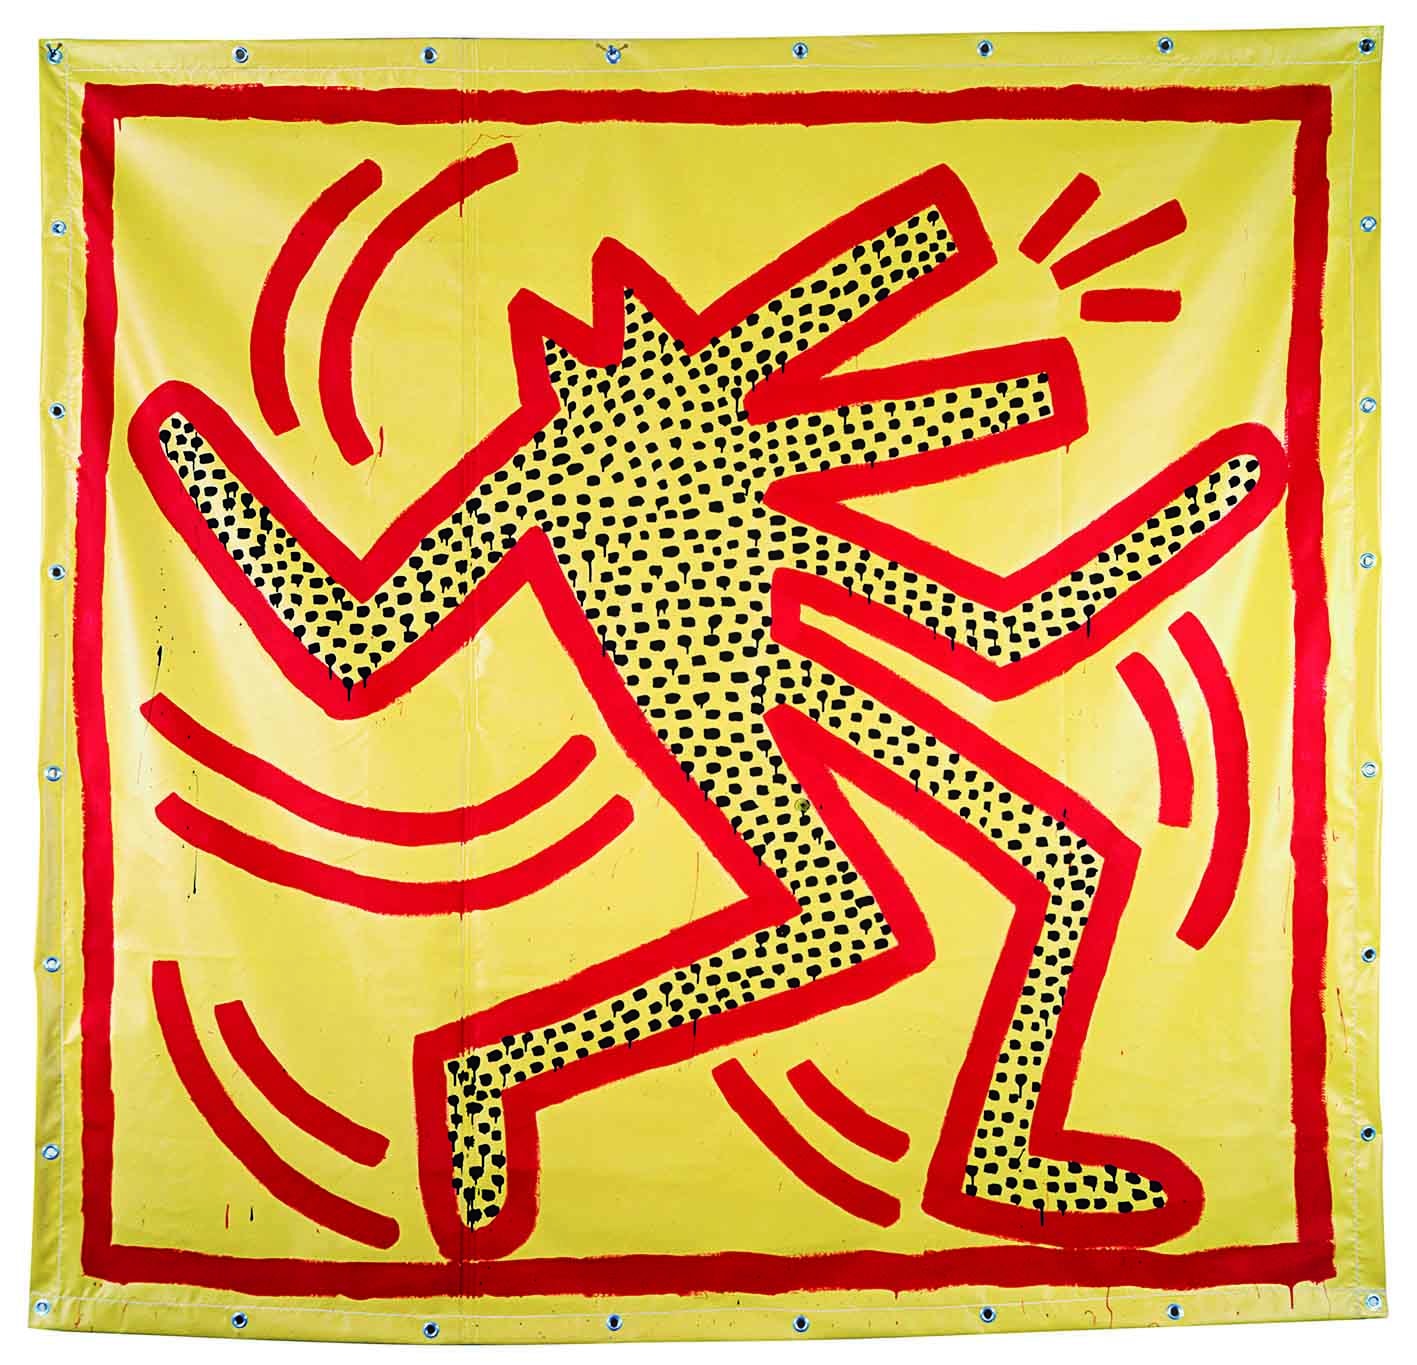 Colour photograph of iconic Keith Haring character outlined in red with black dot filling outline on canvas.